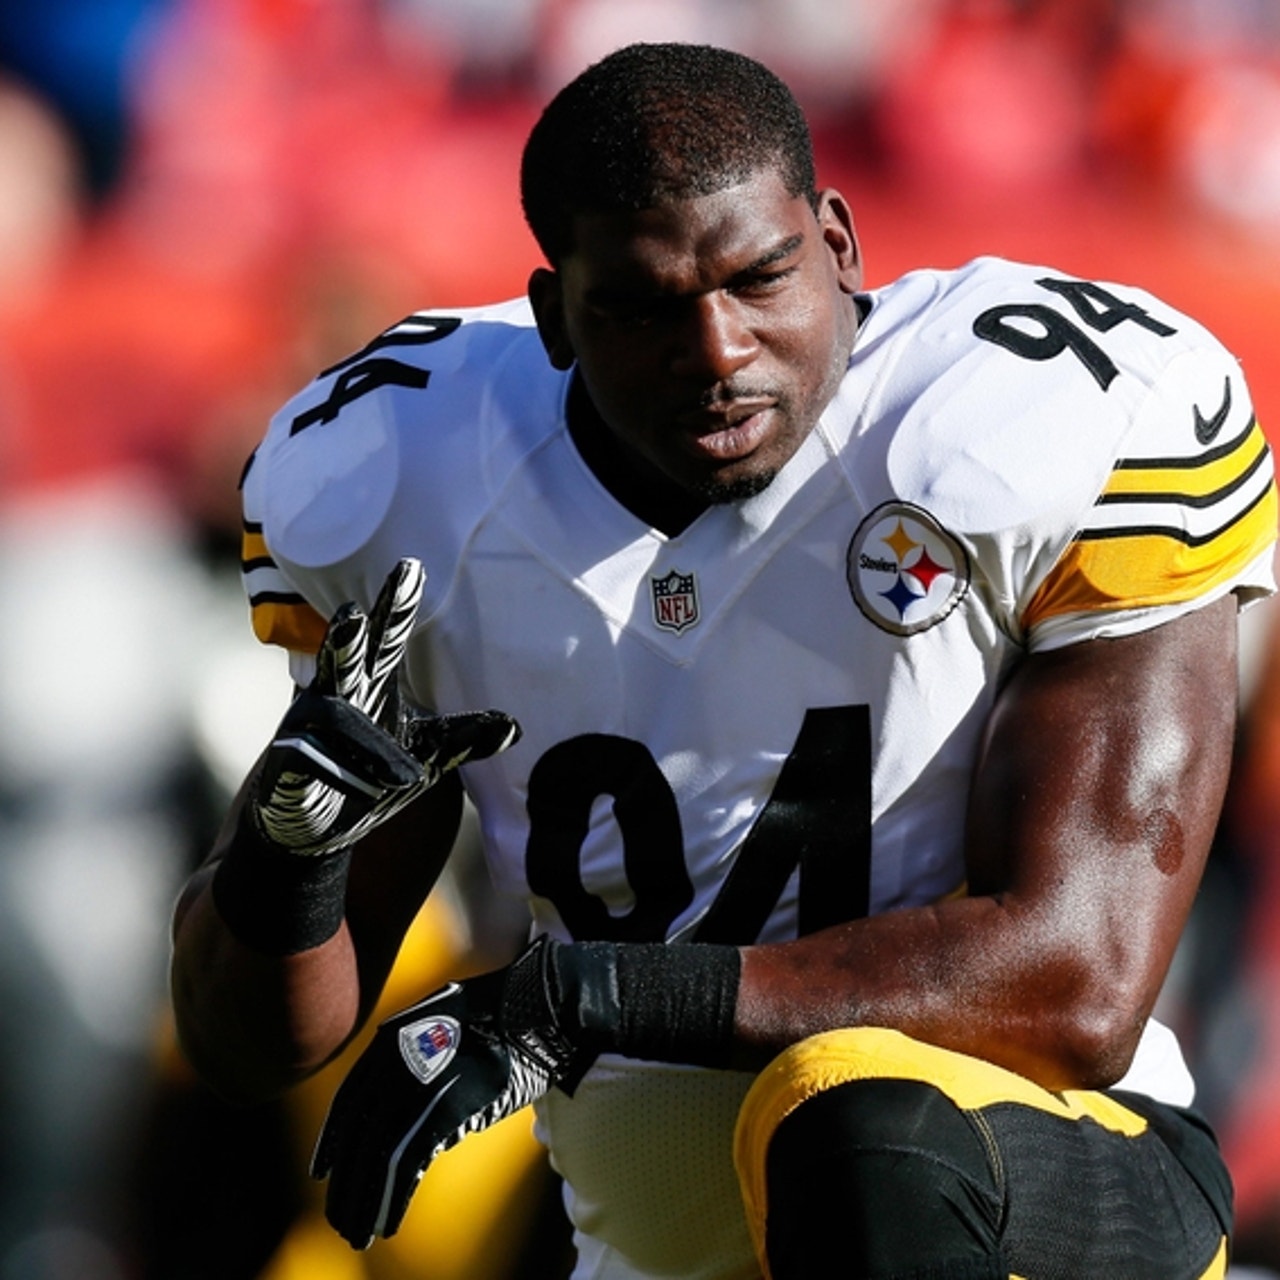 Lawrence Timmons gets sick in end zone vs. Miami (Video)